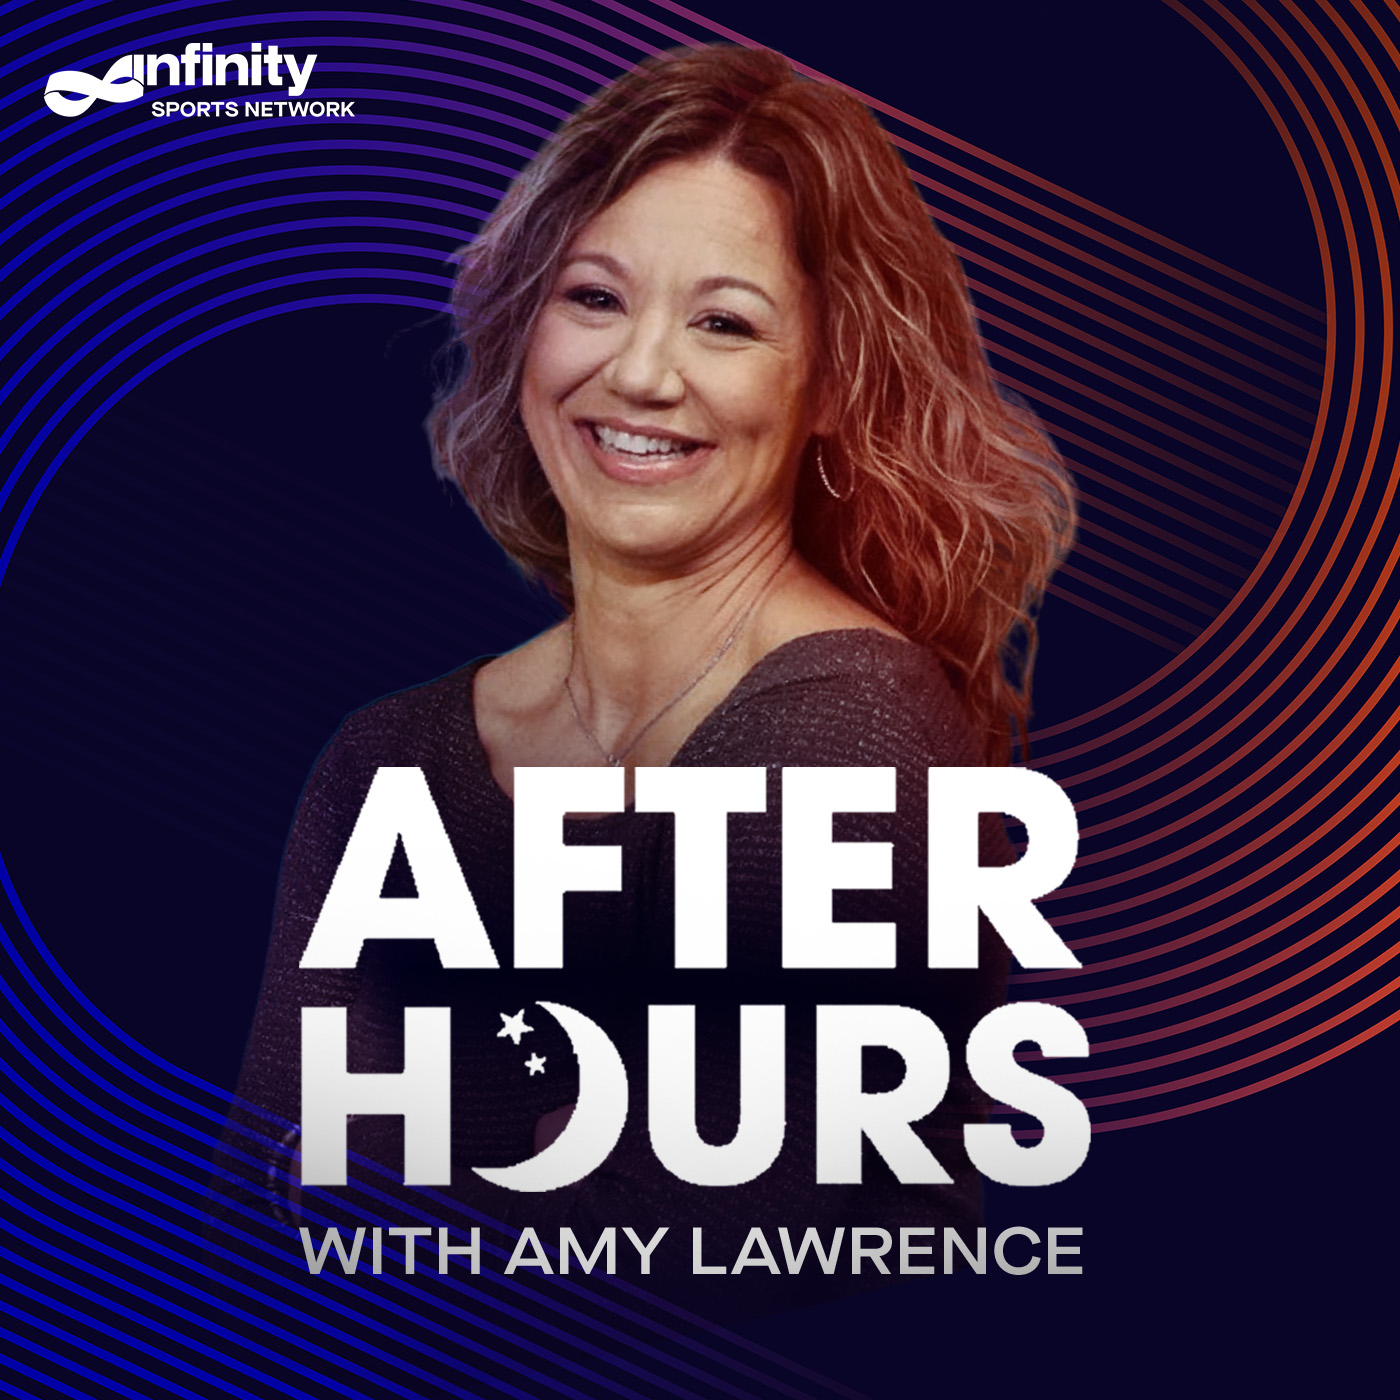 6/29/21 After Hours with Amy Lawrence PODCAST: Hour 3